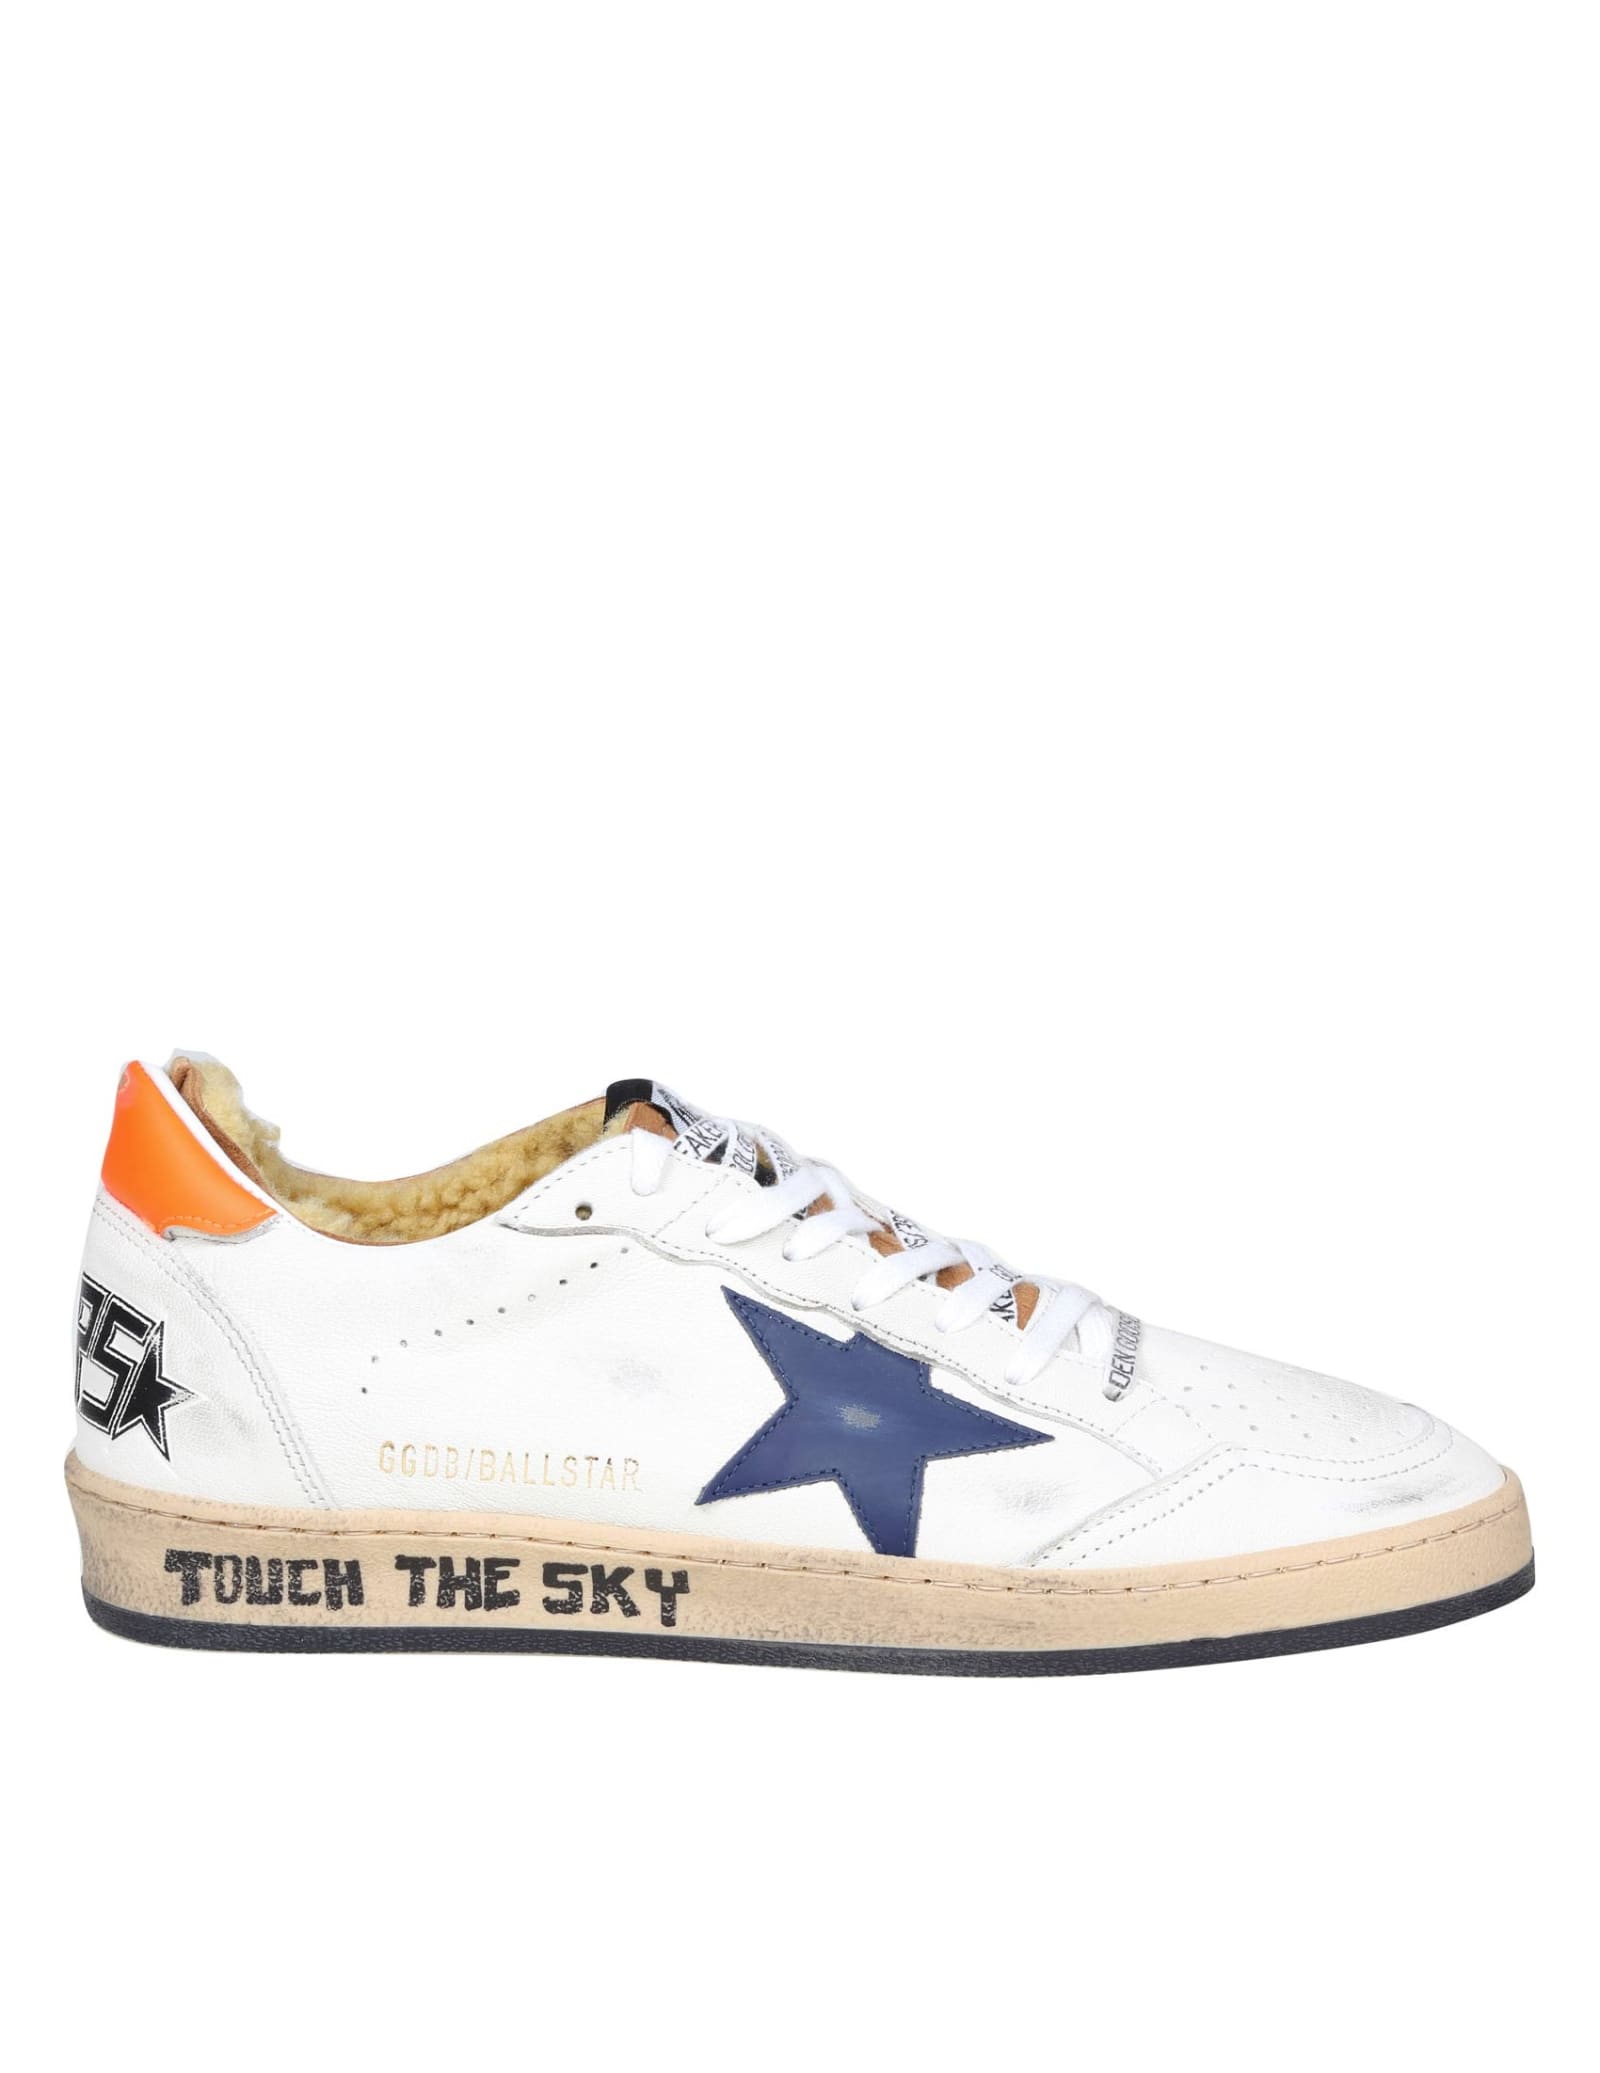 Golden Goose Ball Star In Leather White And Blu